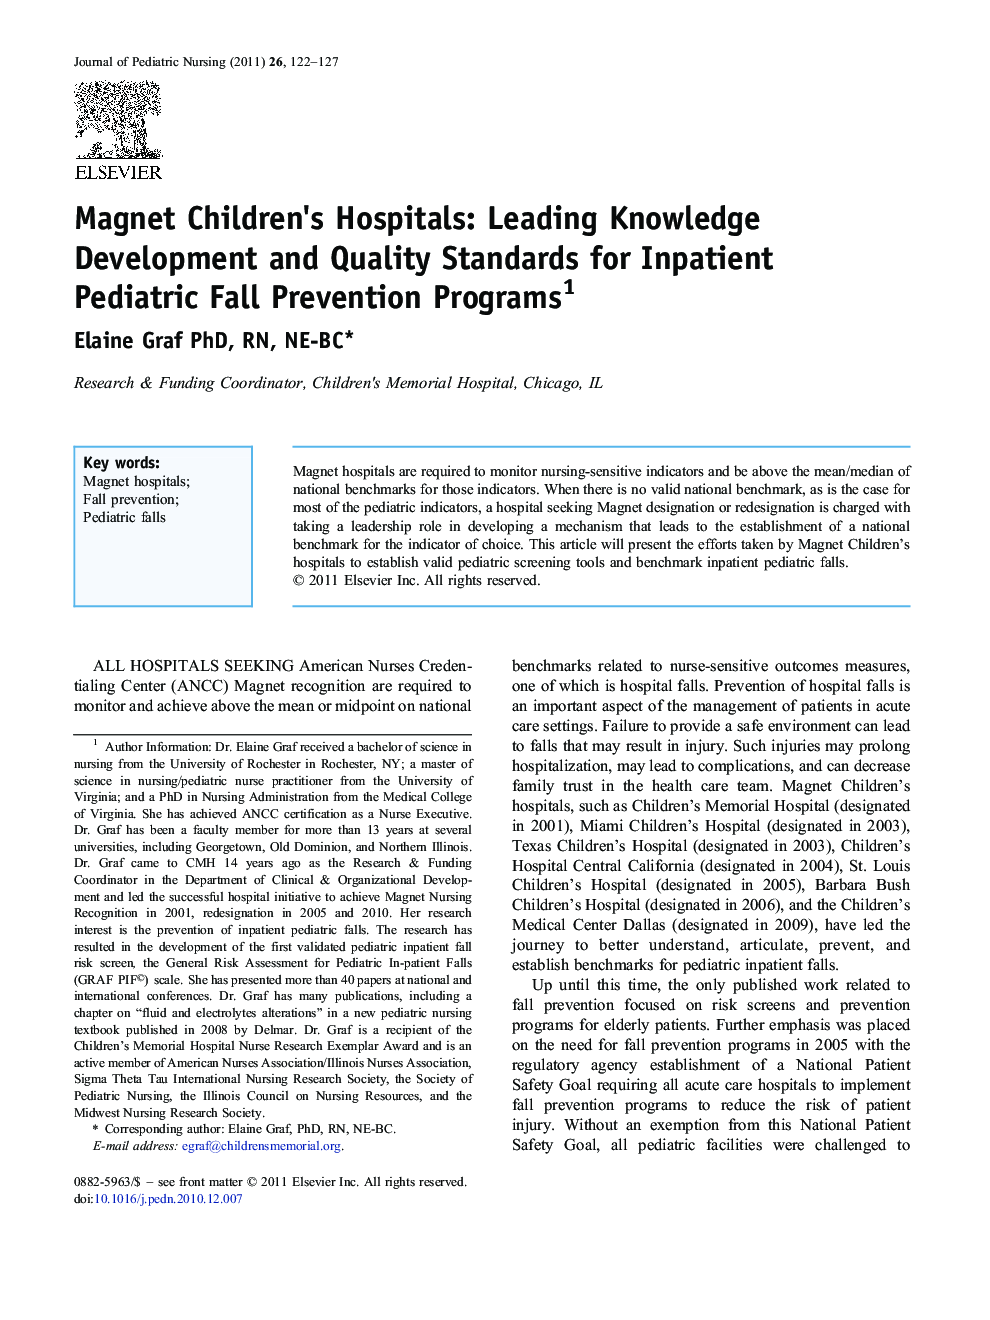 Magnet Children's Hospitals: Leading Knowledge Development and Quality Standards for Inpatient Pediatric Fall Prevention Programs 1